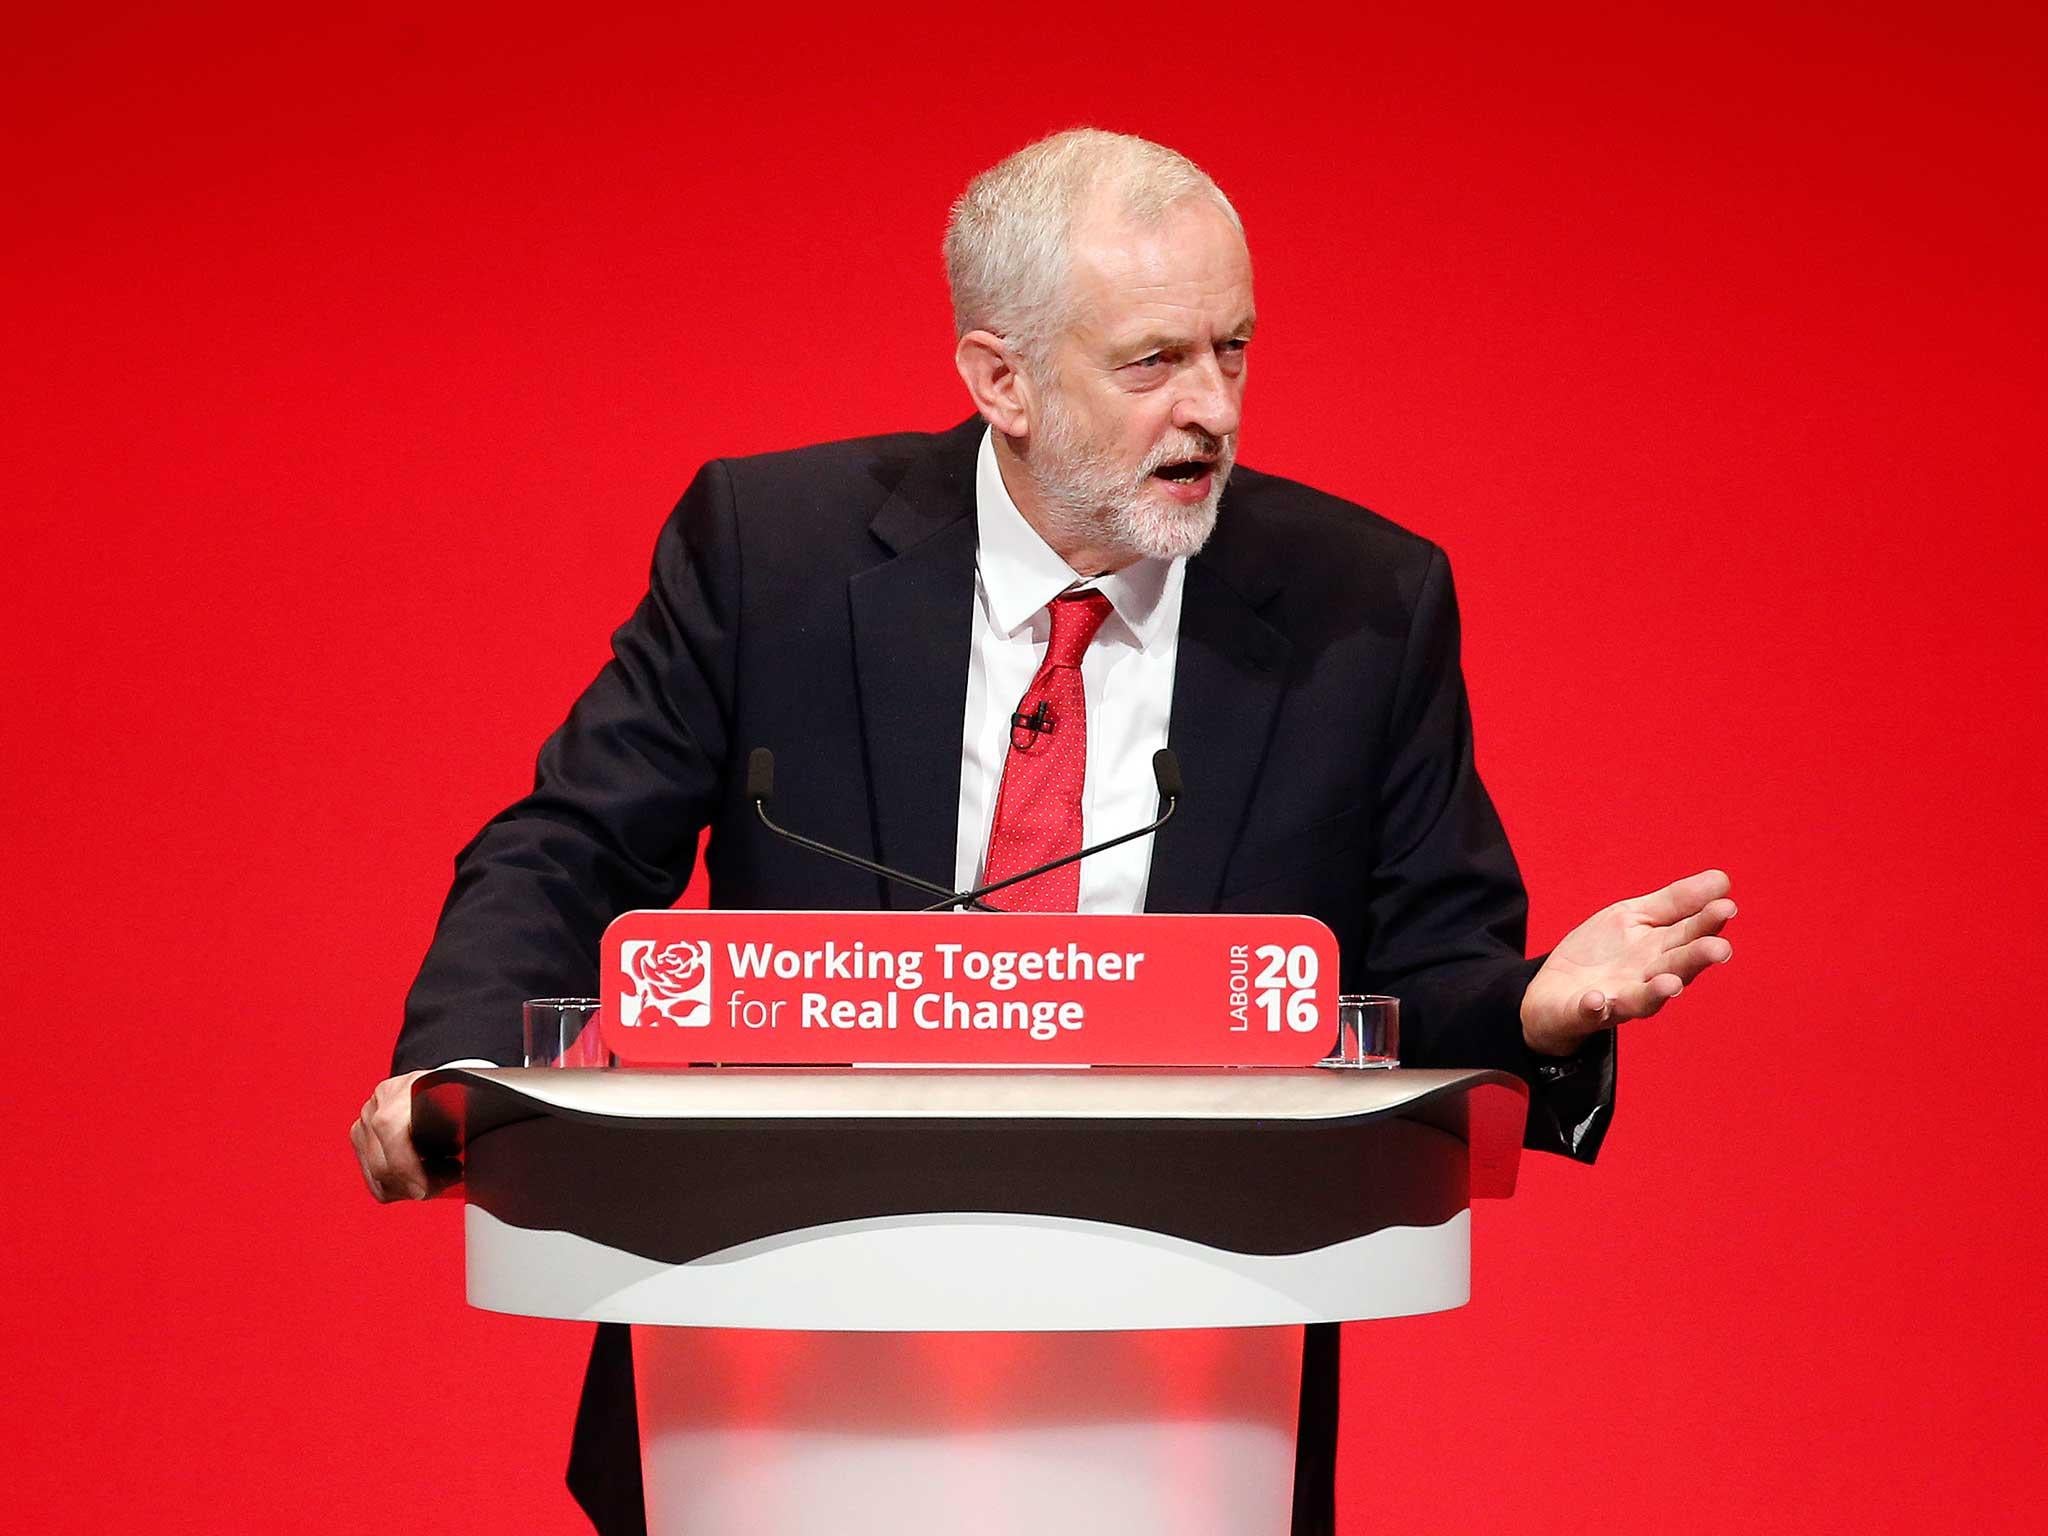 The Labour Party delivers his keynote speech on the final day of the Labour Party conference in Liverpool on Wednesday